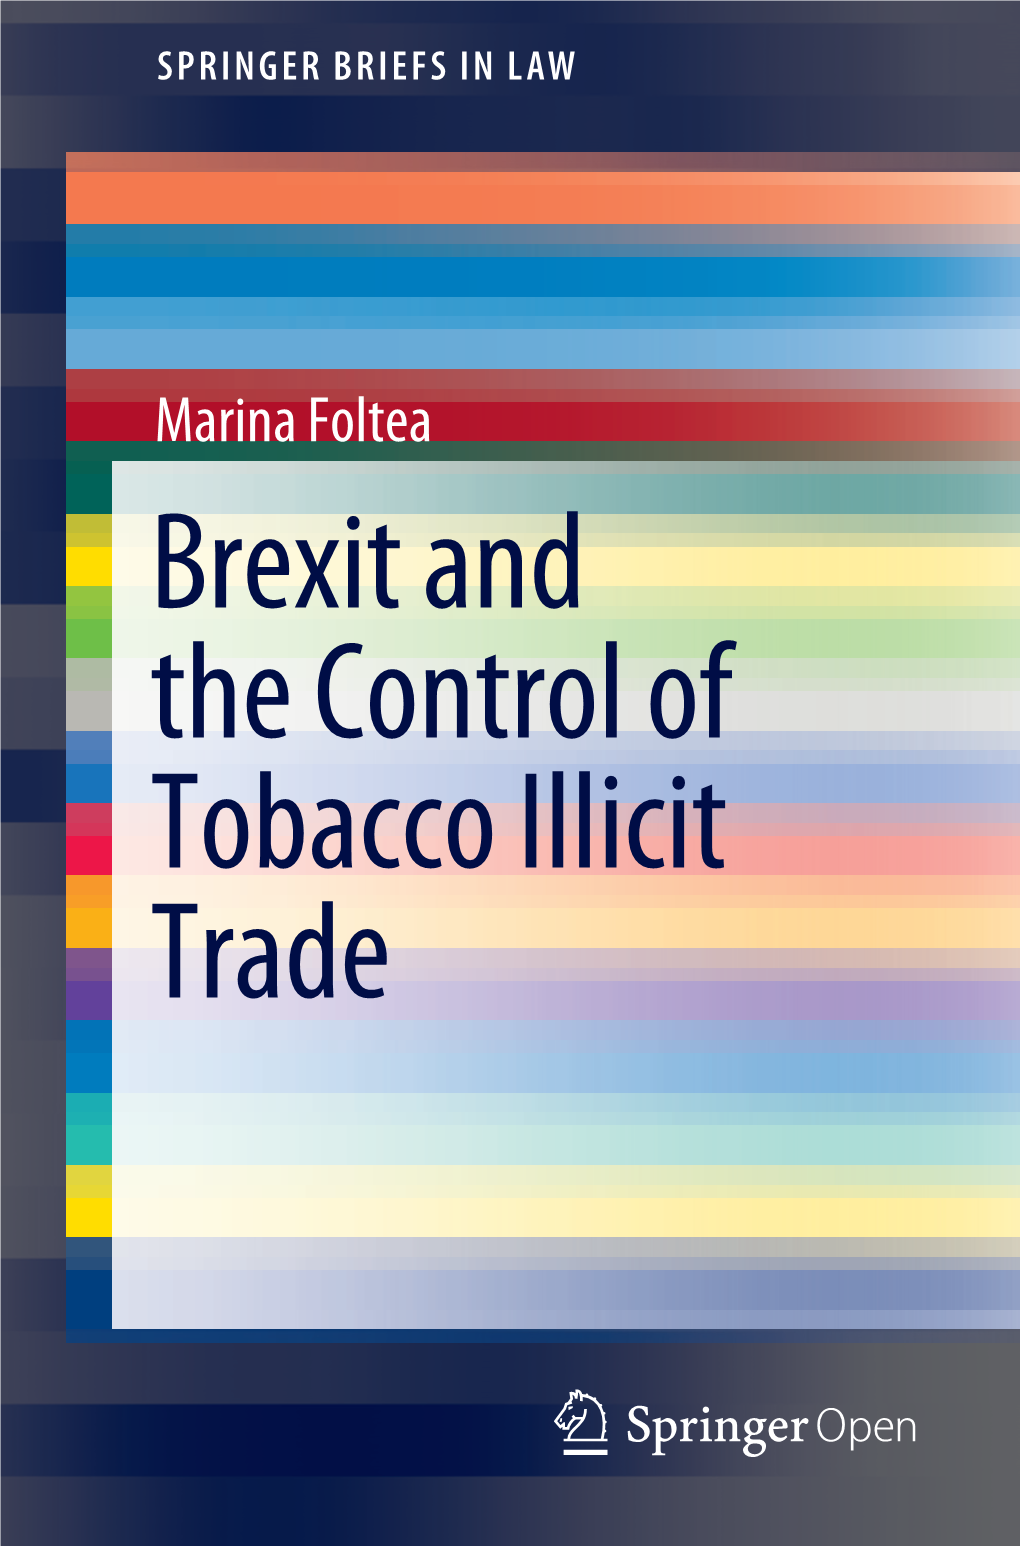 Brexit and the Control of Tobacco Illicit Trade Springerbriefs in Law More Information About This Series at Marina Foltea